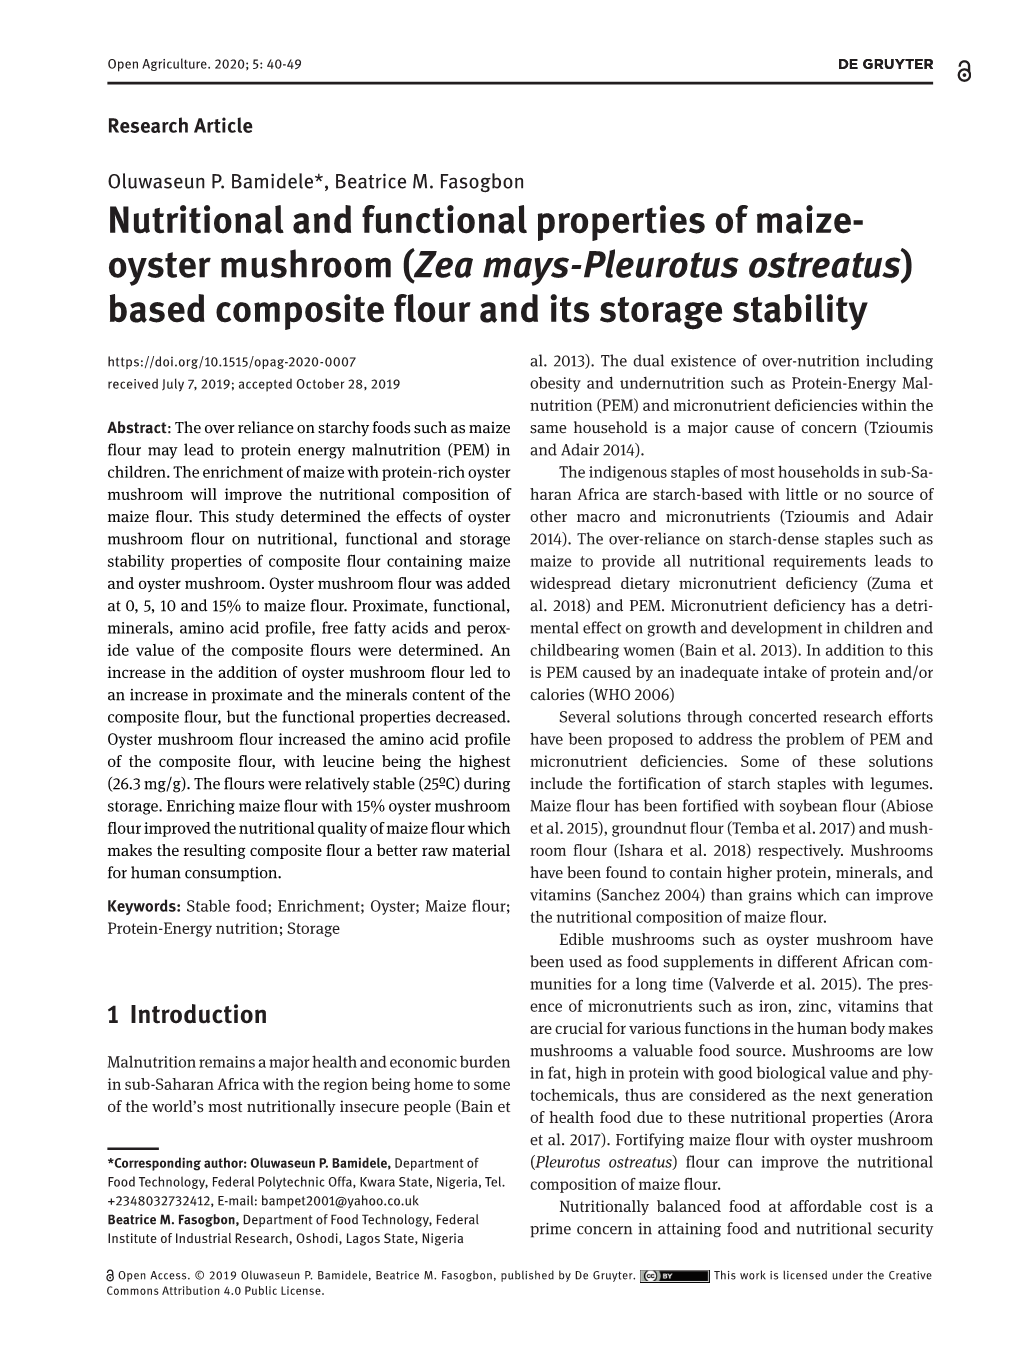 Nutritional and Functional Properties of Maize